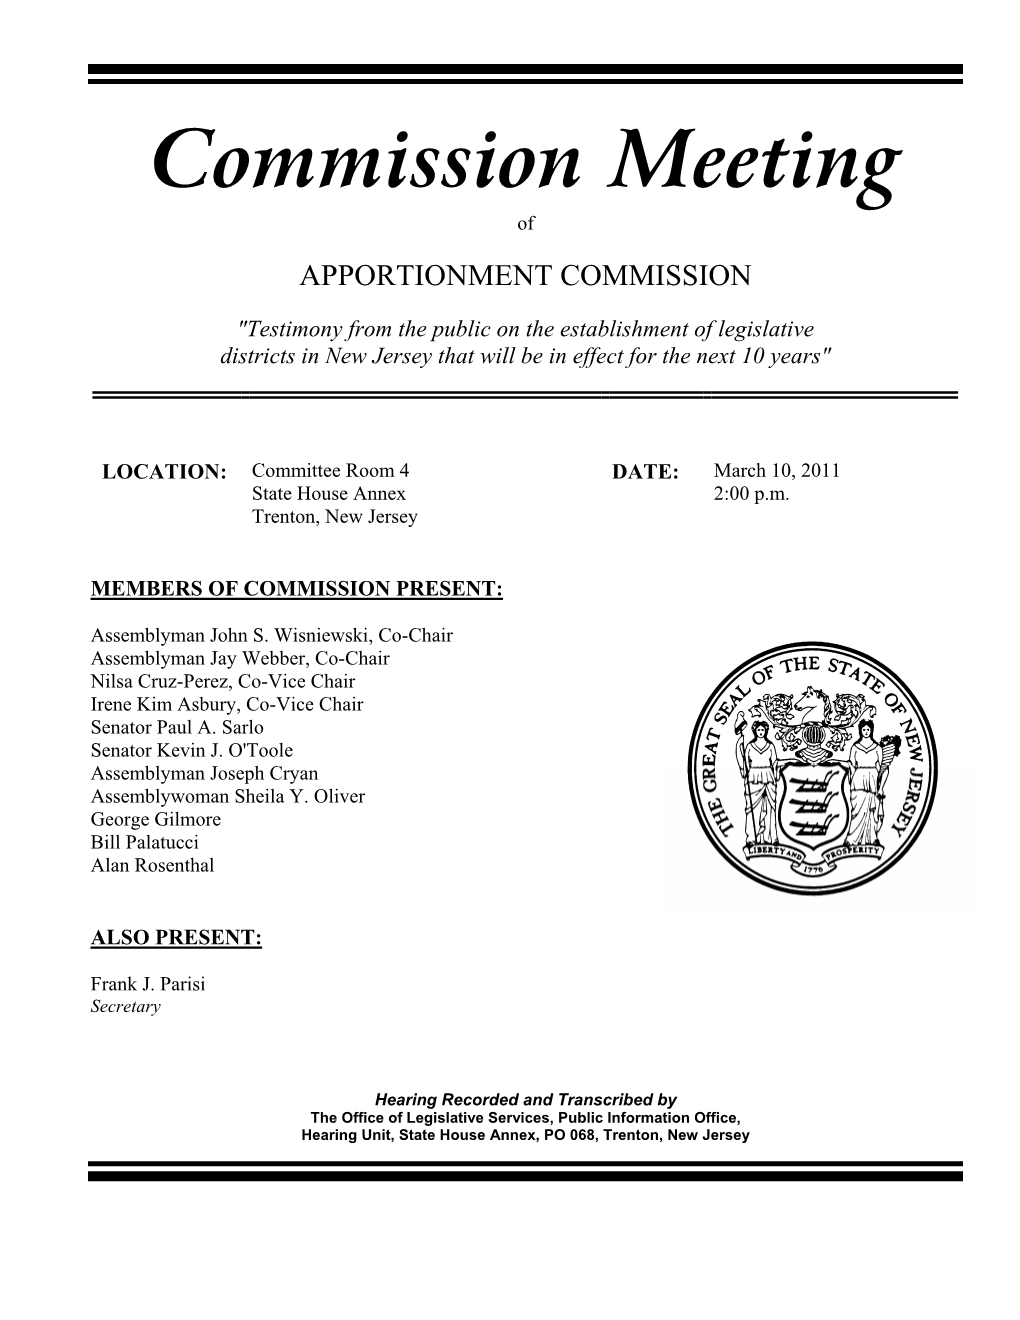 Commission Meeting Of